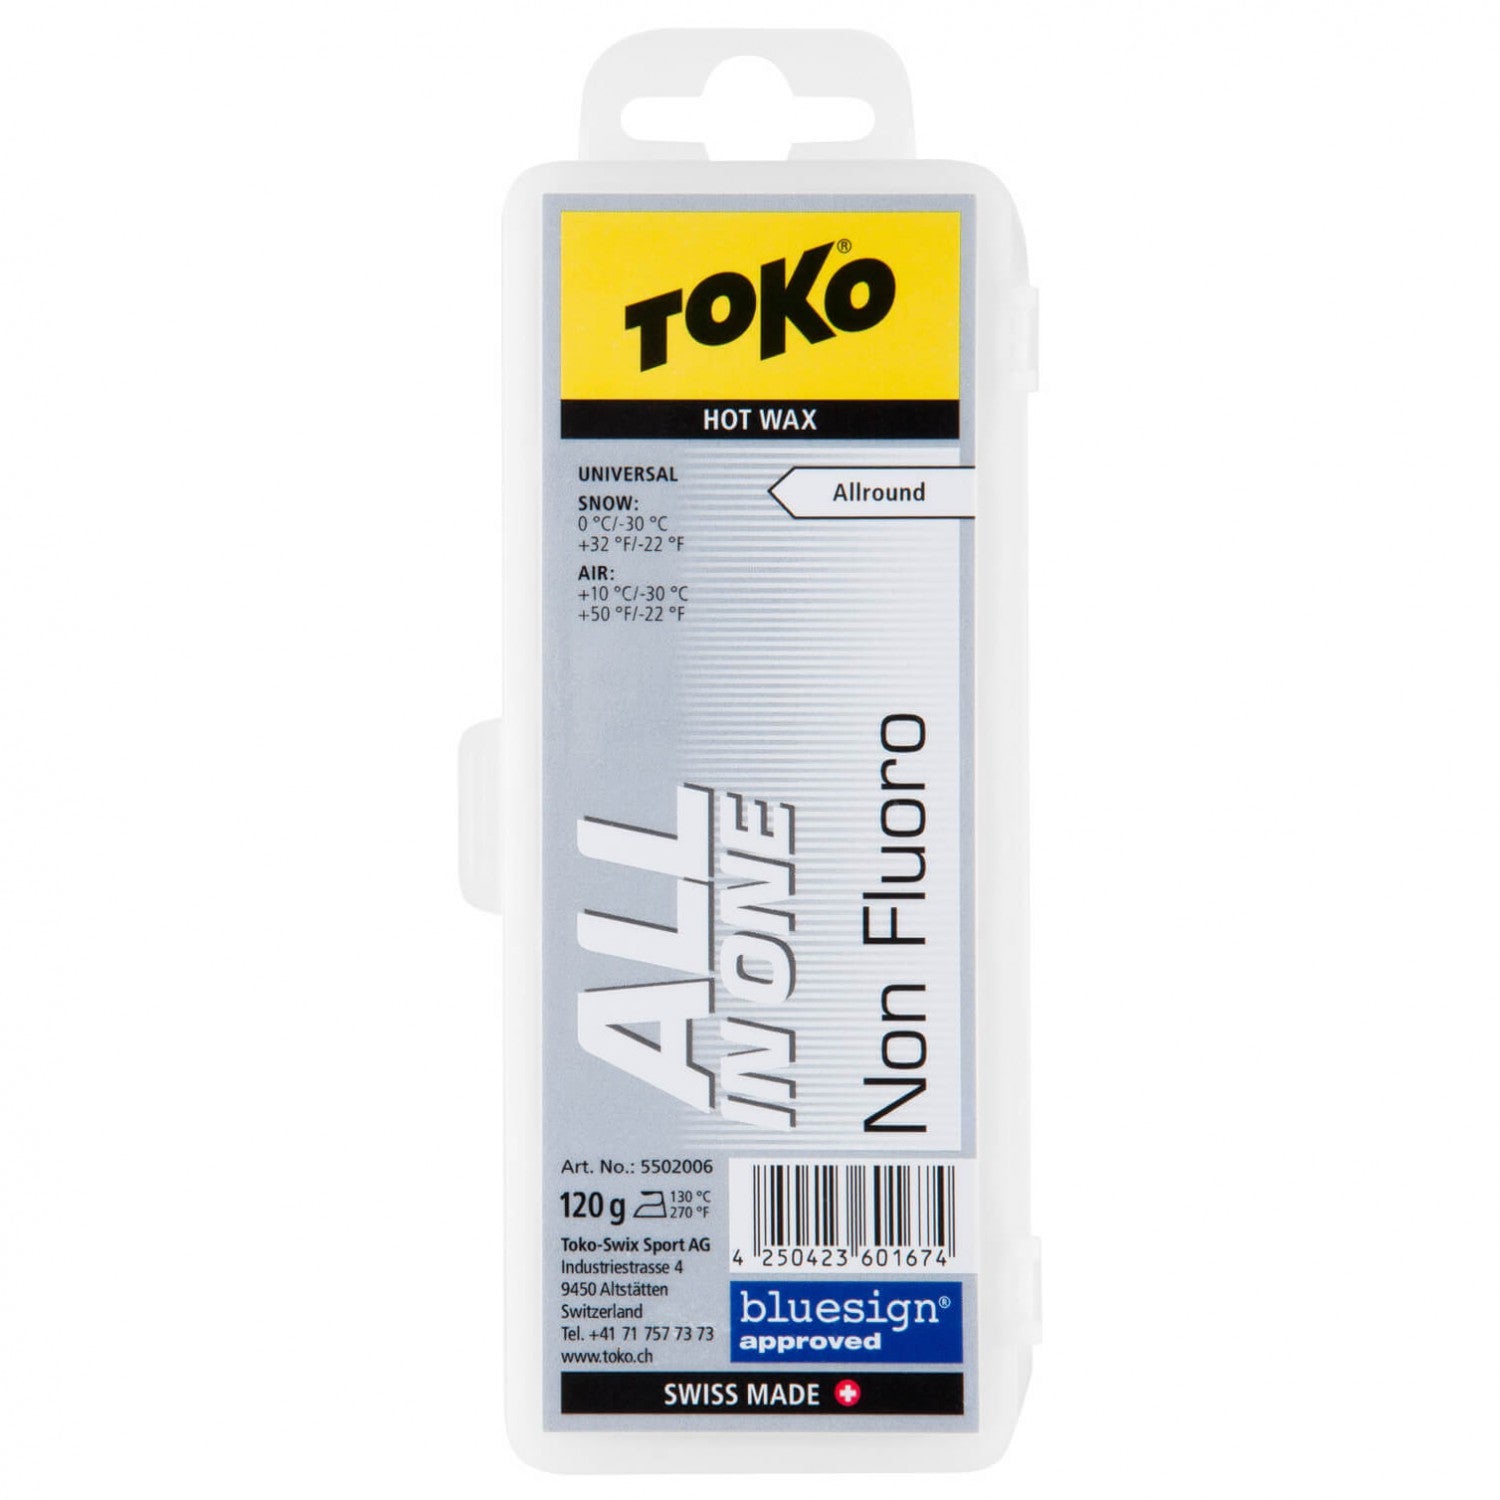 Toko All-in-one Hot Wax 120g